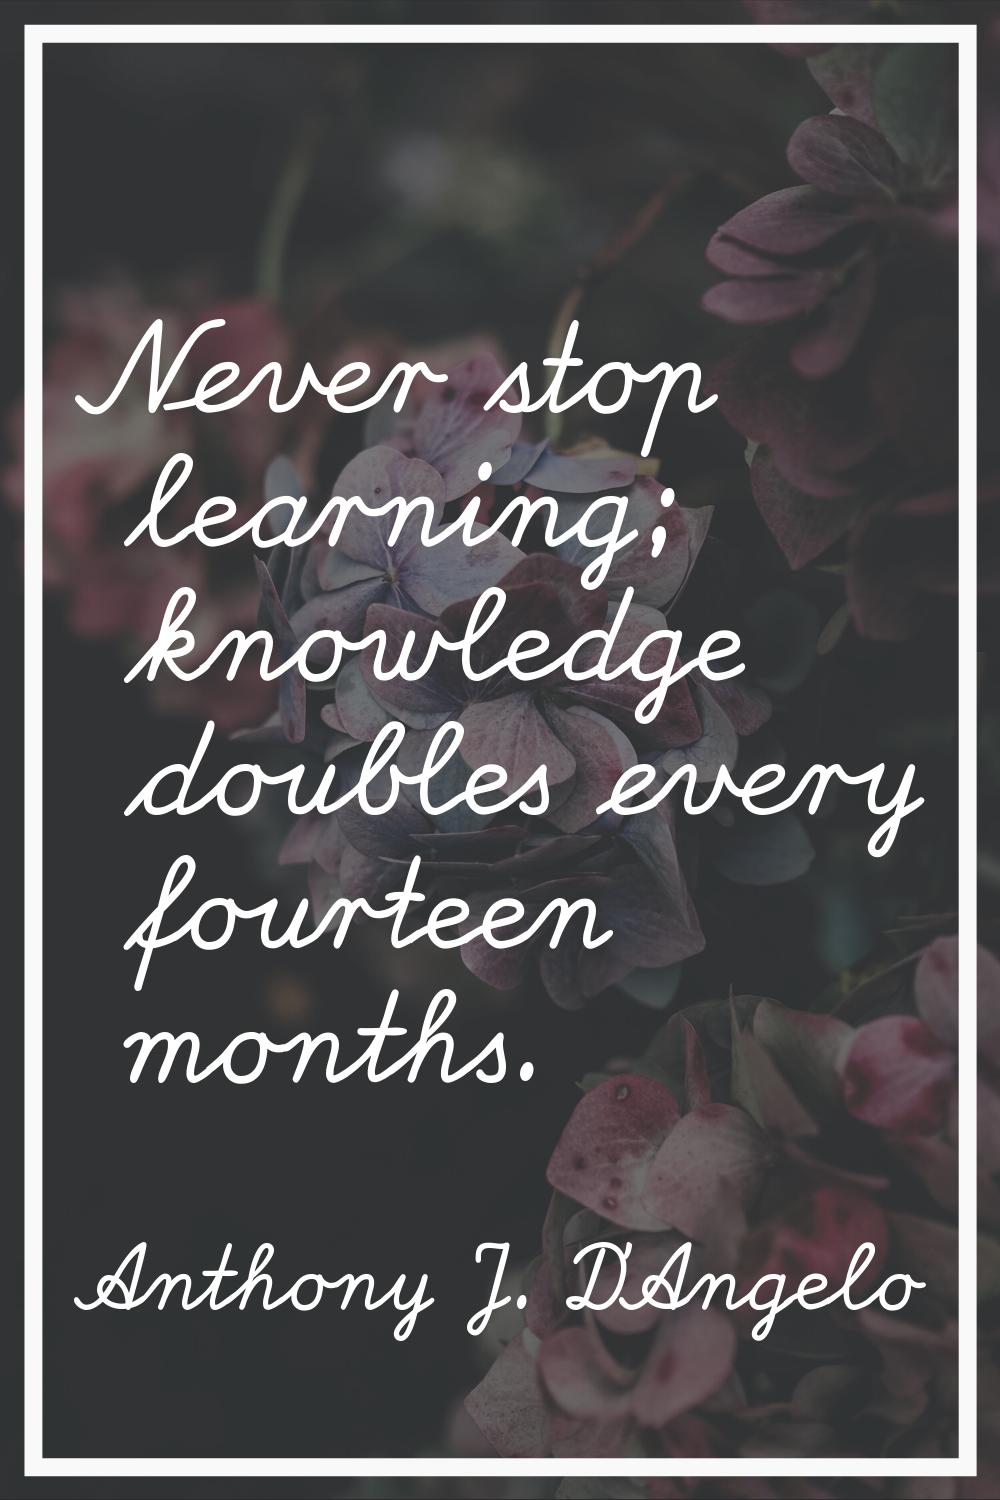 Never stop learning; knowledge doubles every fourteen months.